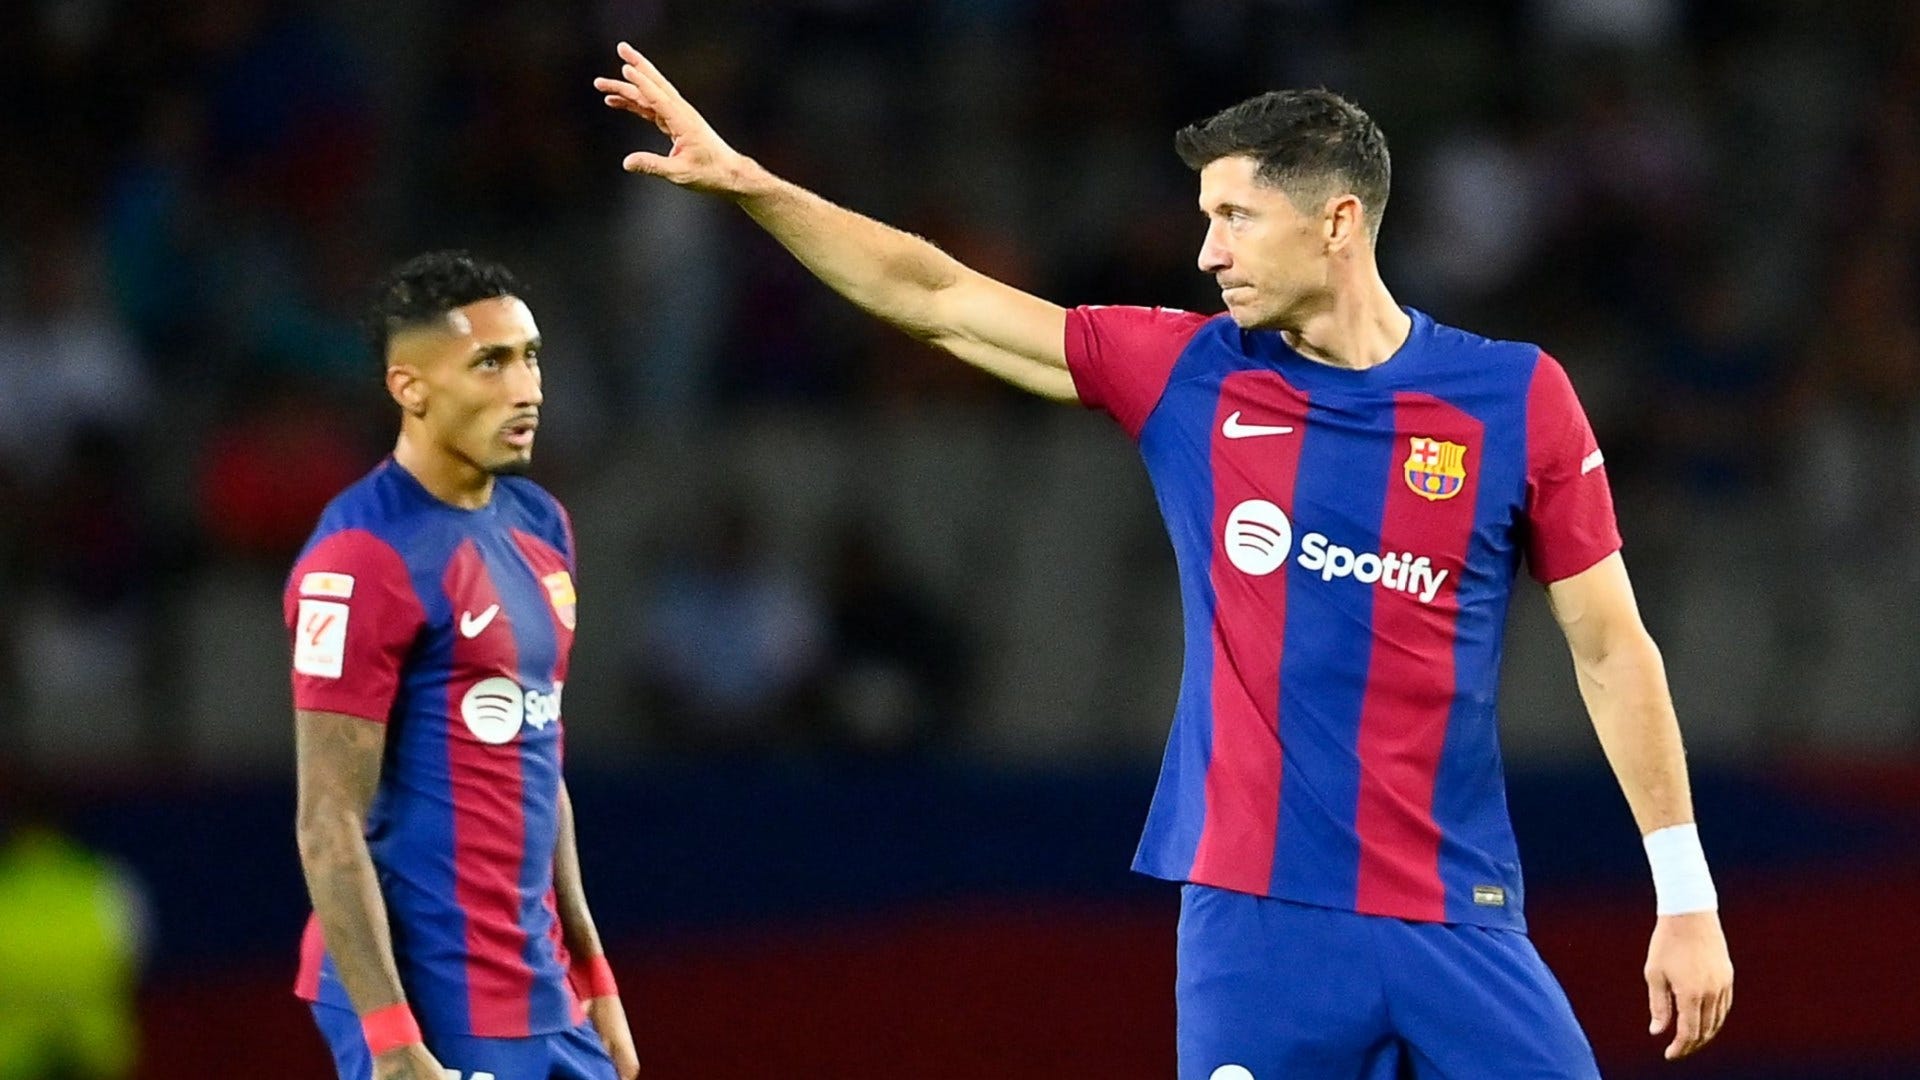 Mallorca vs Barcelona Live stream, TV channel, kick-off time and where to watch Goal UK